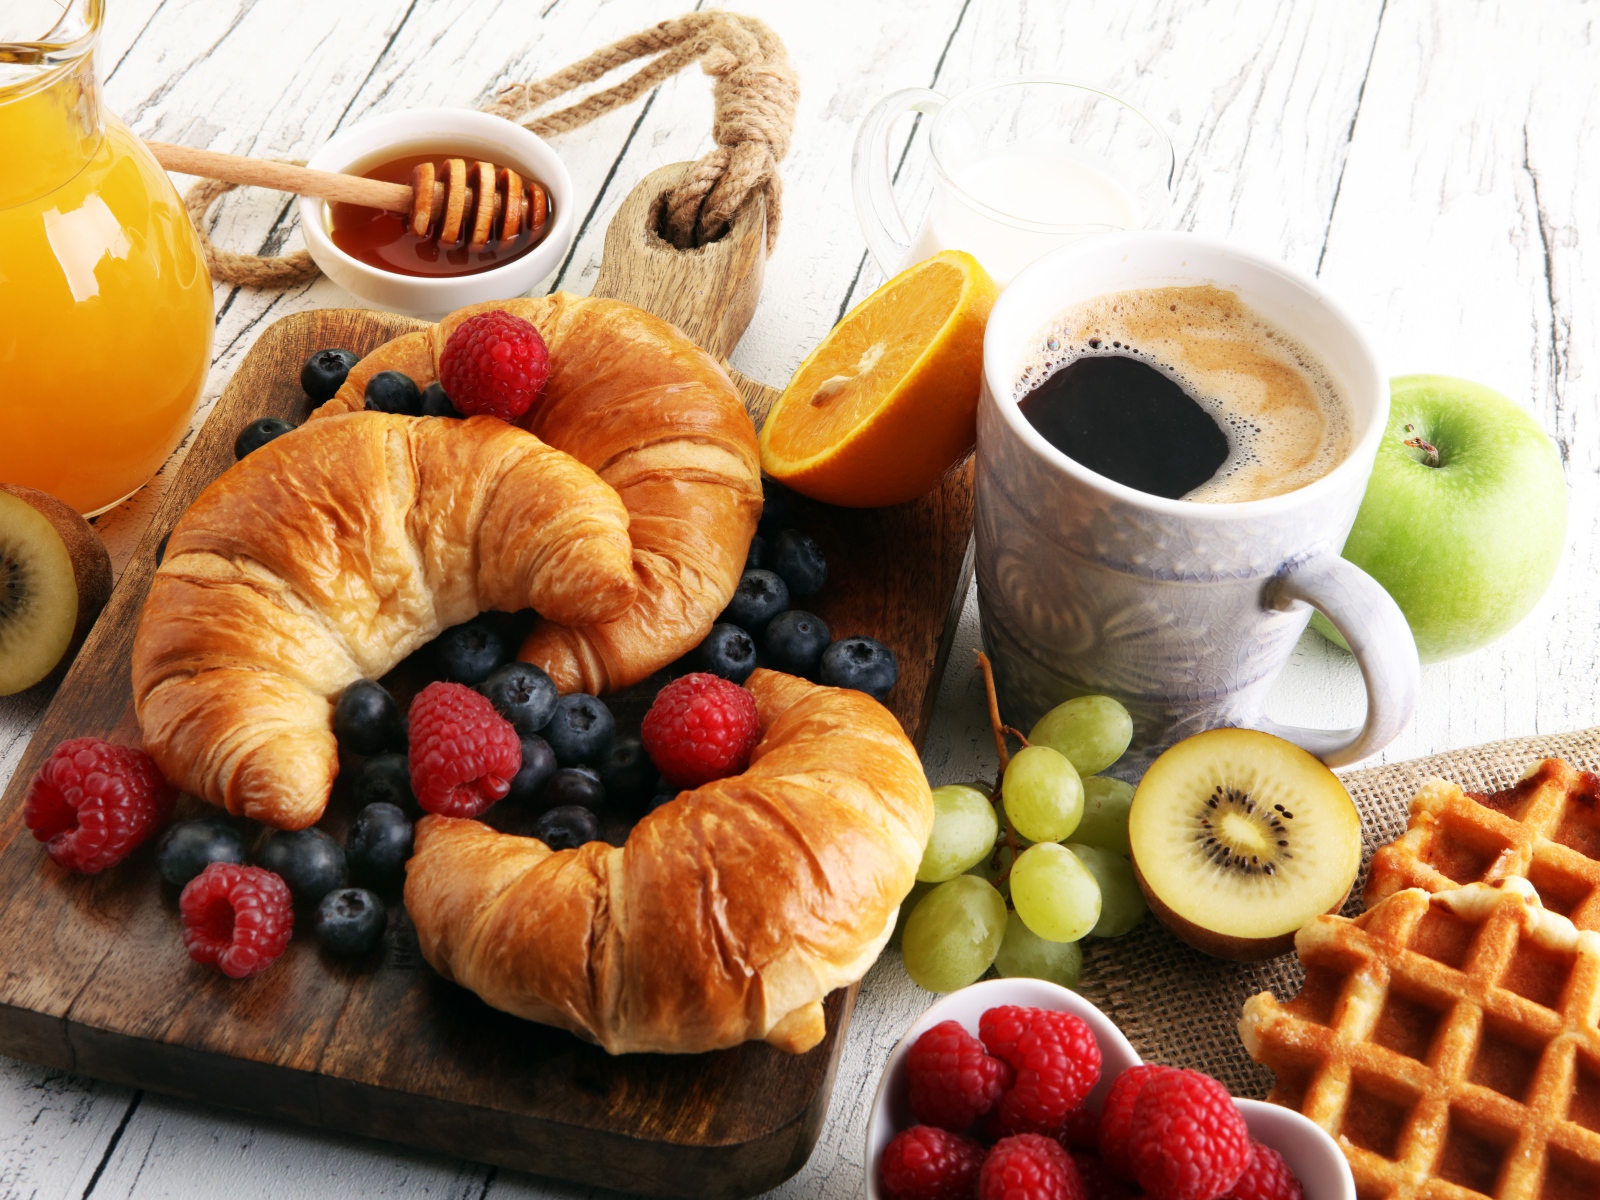 Croissants with berries, on the table with coffee, honey and waffles